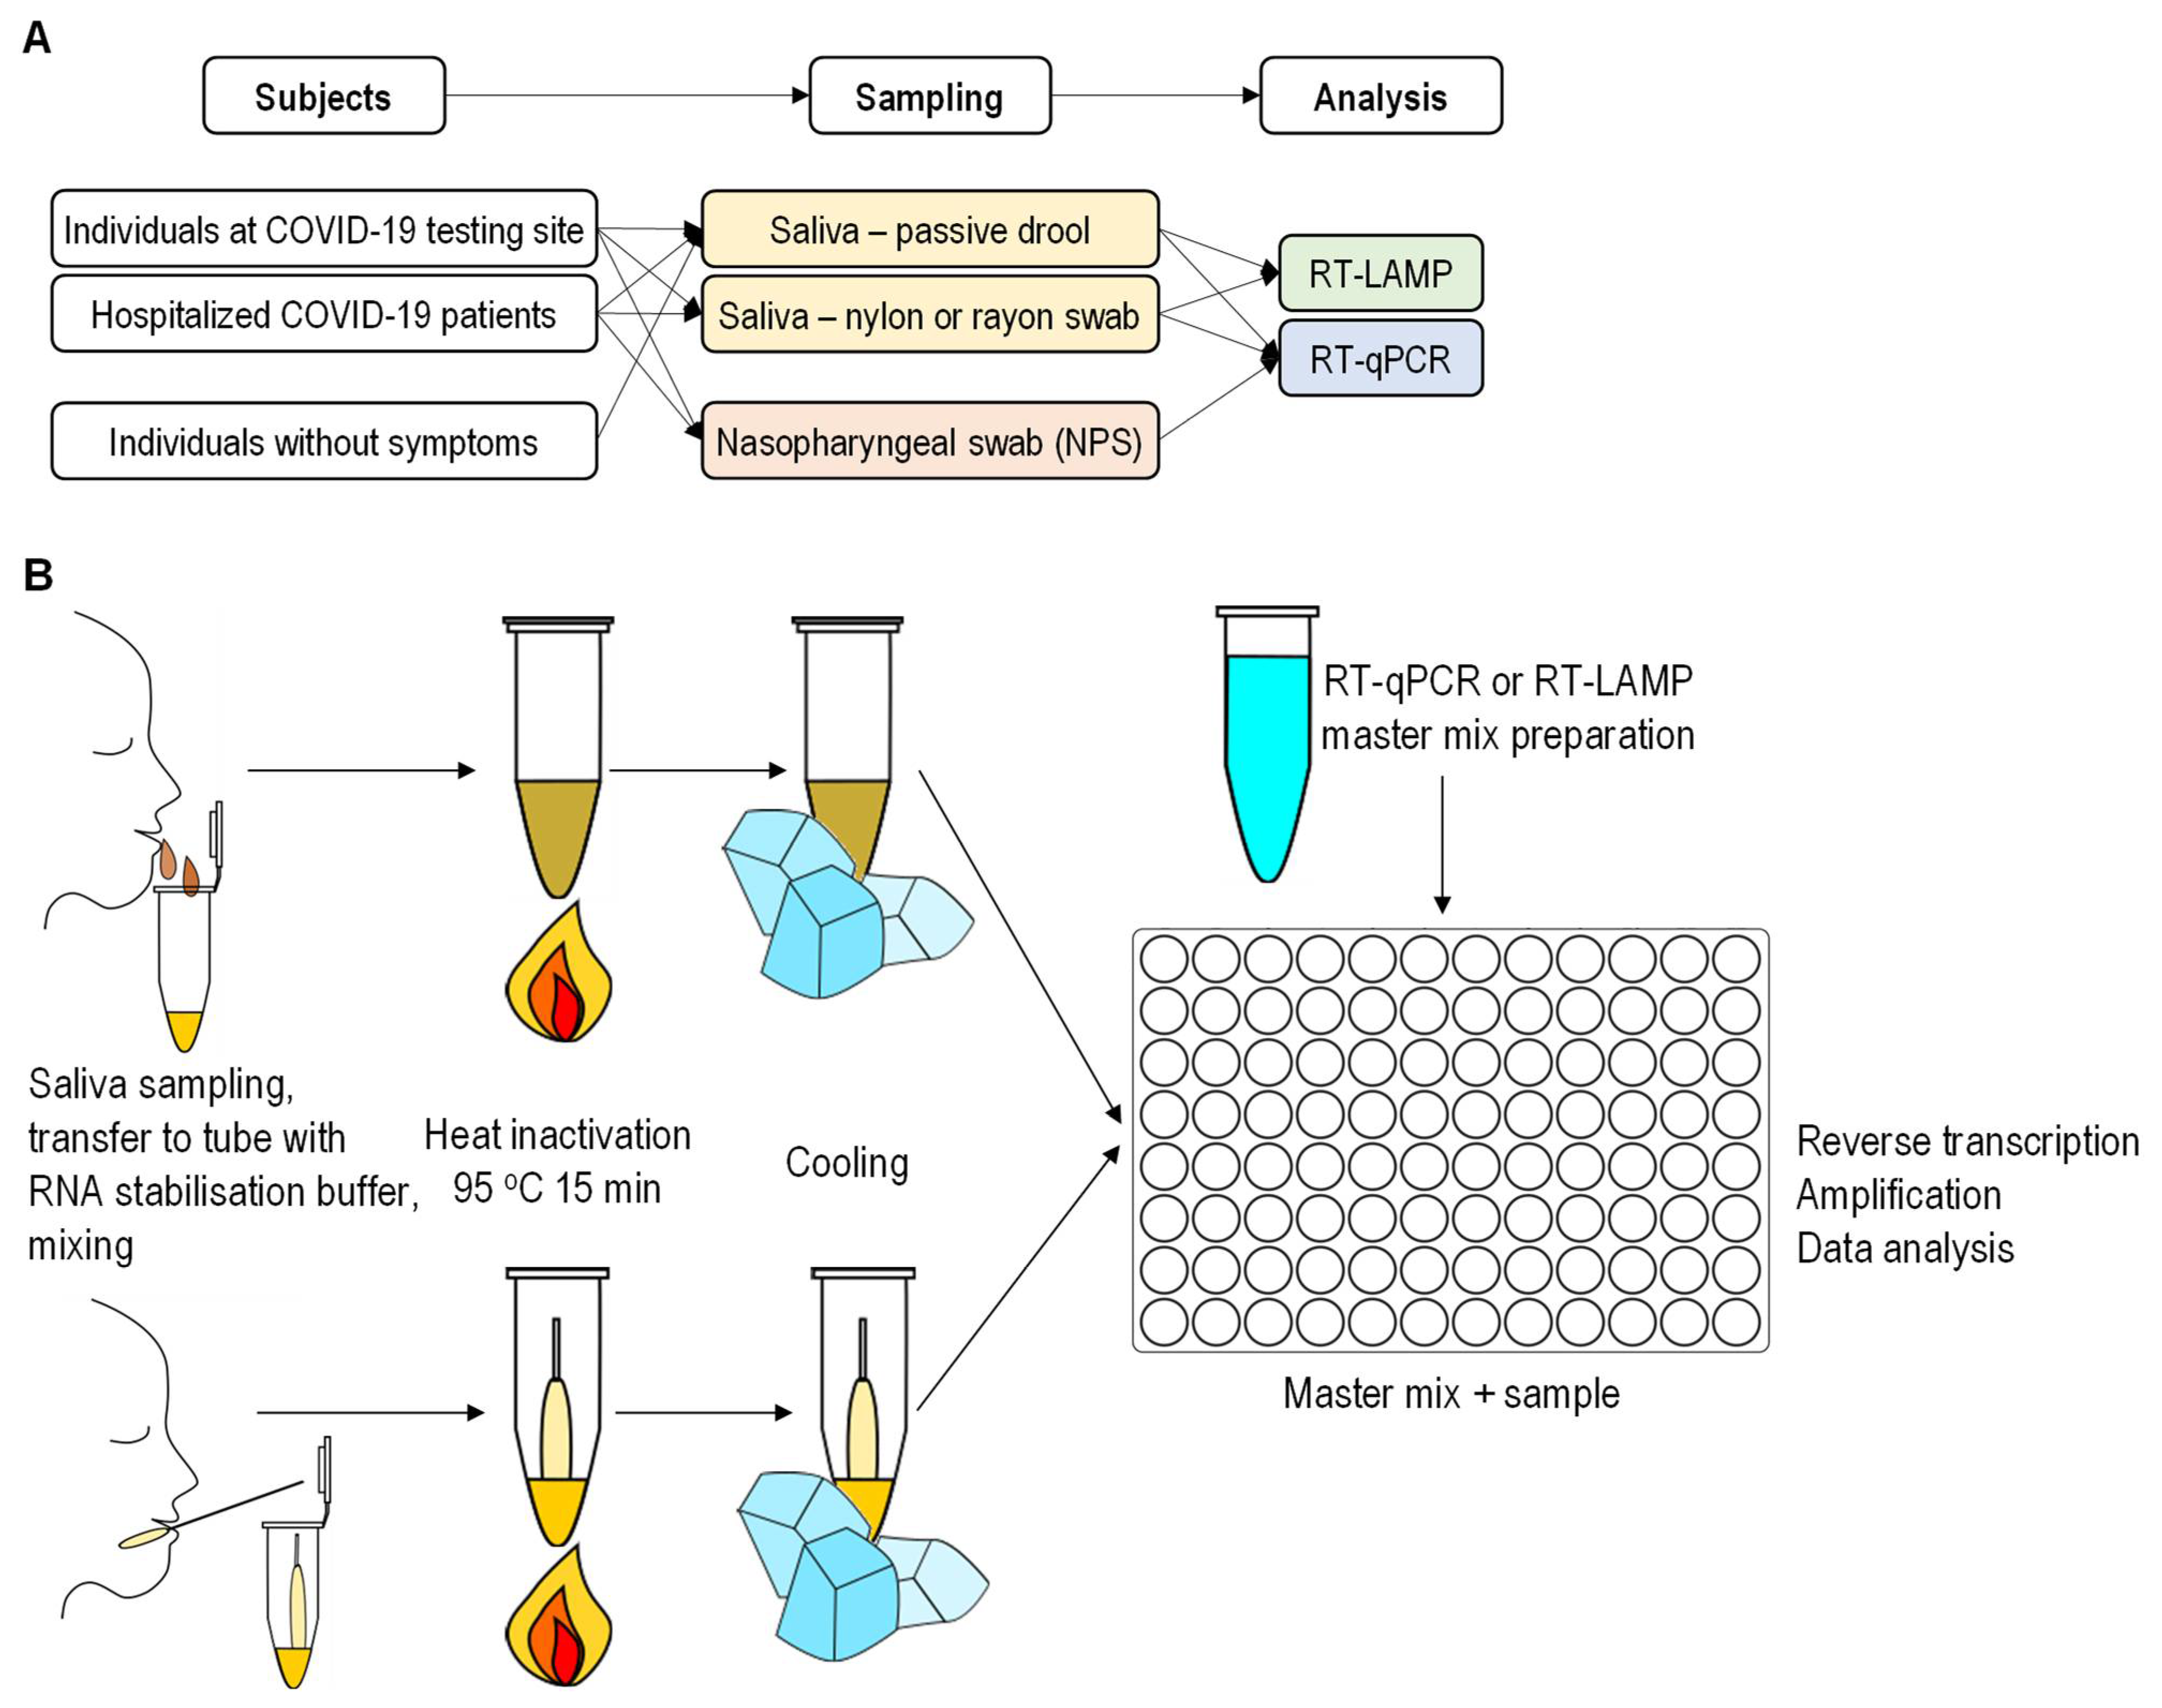 Molecules | Free Full-Text | Robust Saliva-Based RNA Extraction-Free One- Step Nucleic Acid Amplification Test for Mass SARS-CoV-2 Monitoring